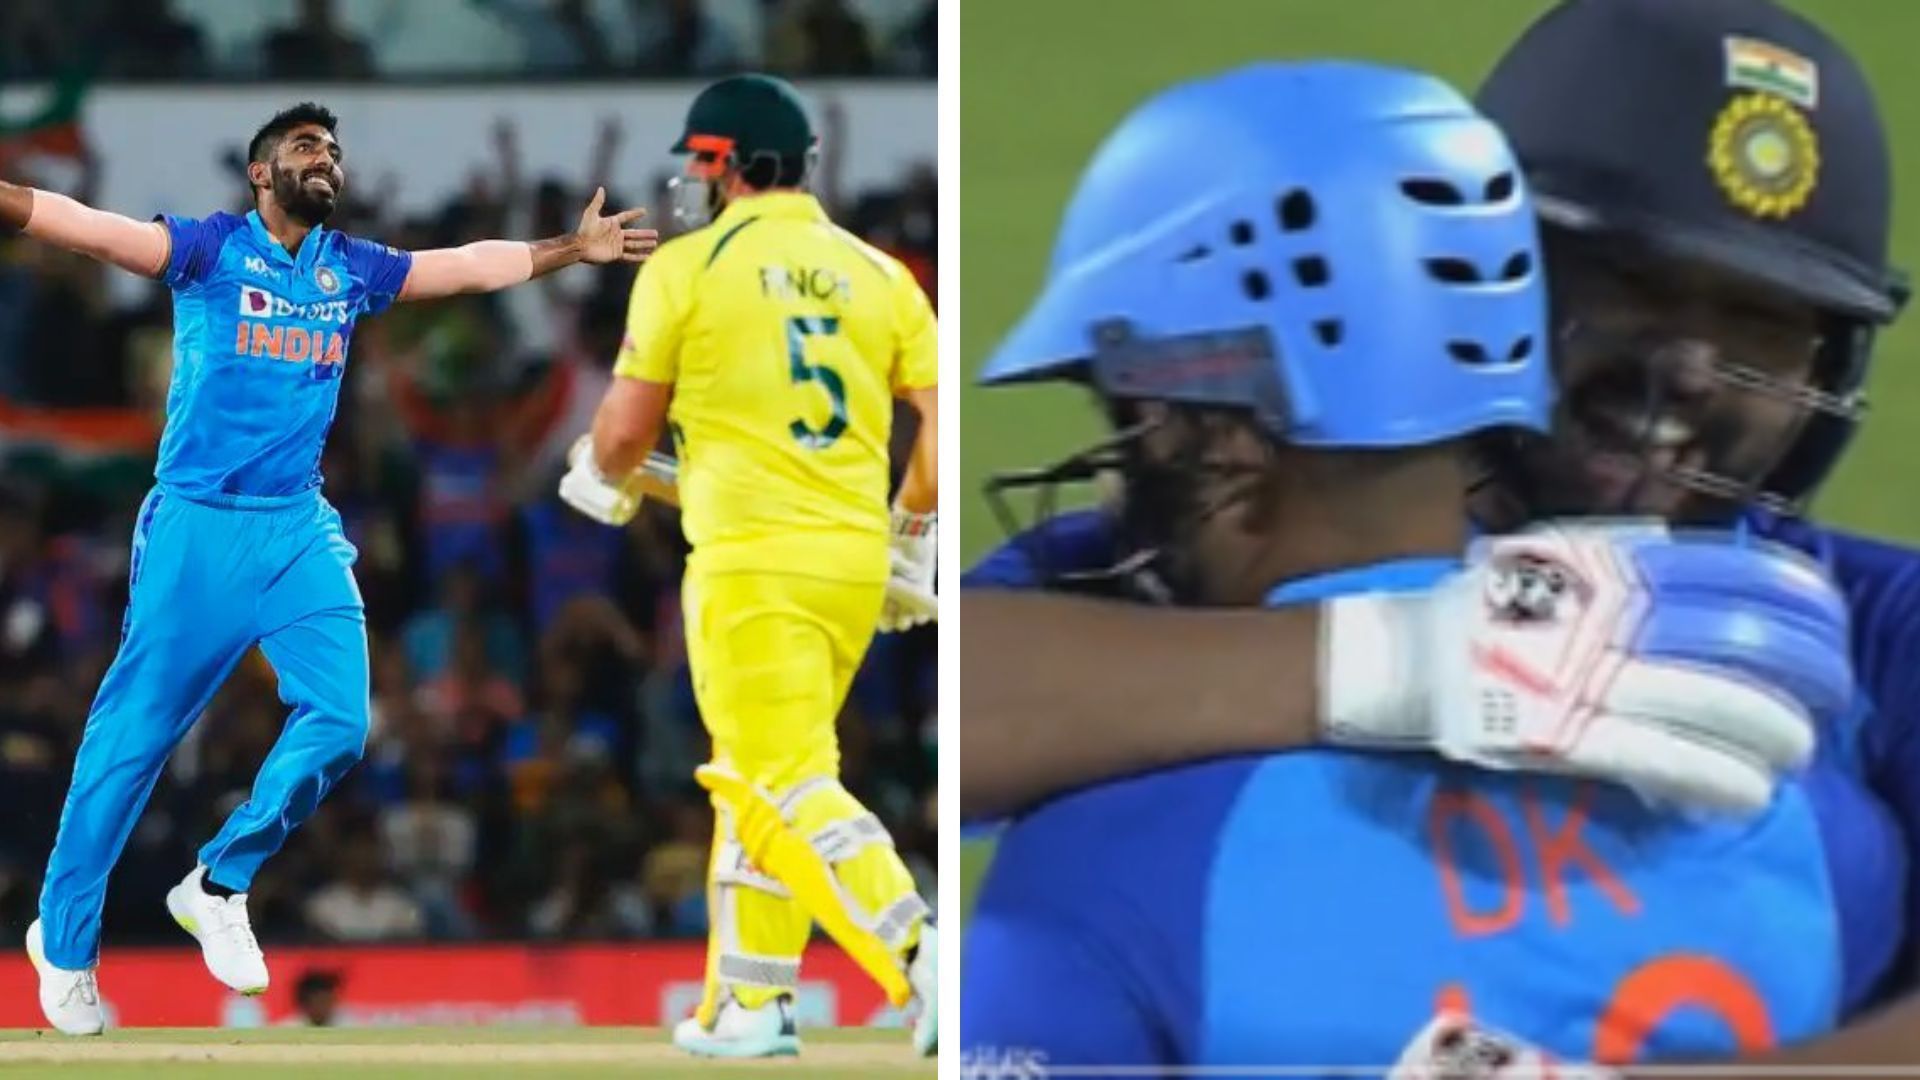 Jasprit Bumrah back to his best and Rohit Sharma hugging Dinesh karthik were some of the wholesome moments. (P.C.:BCCI)